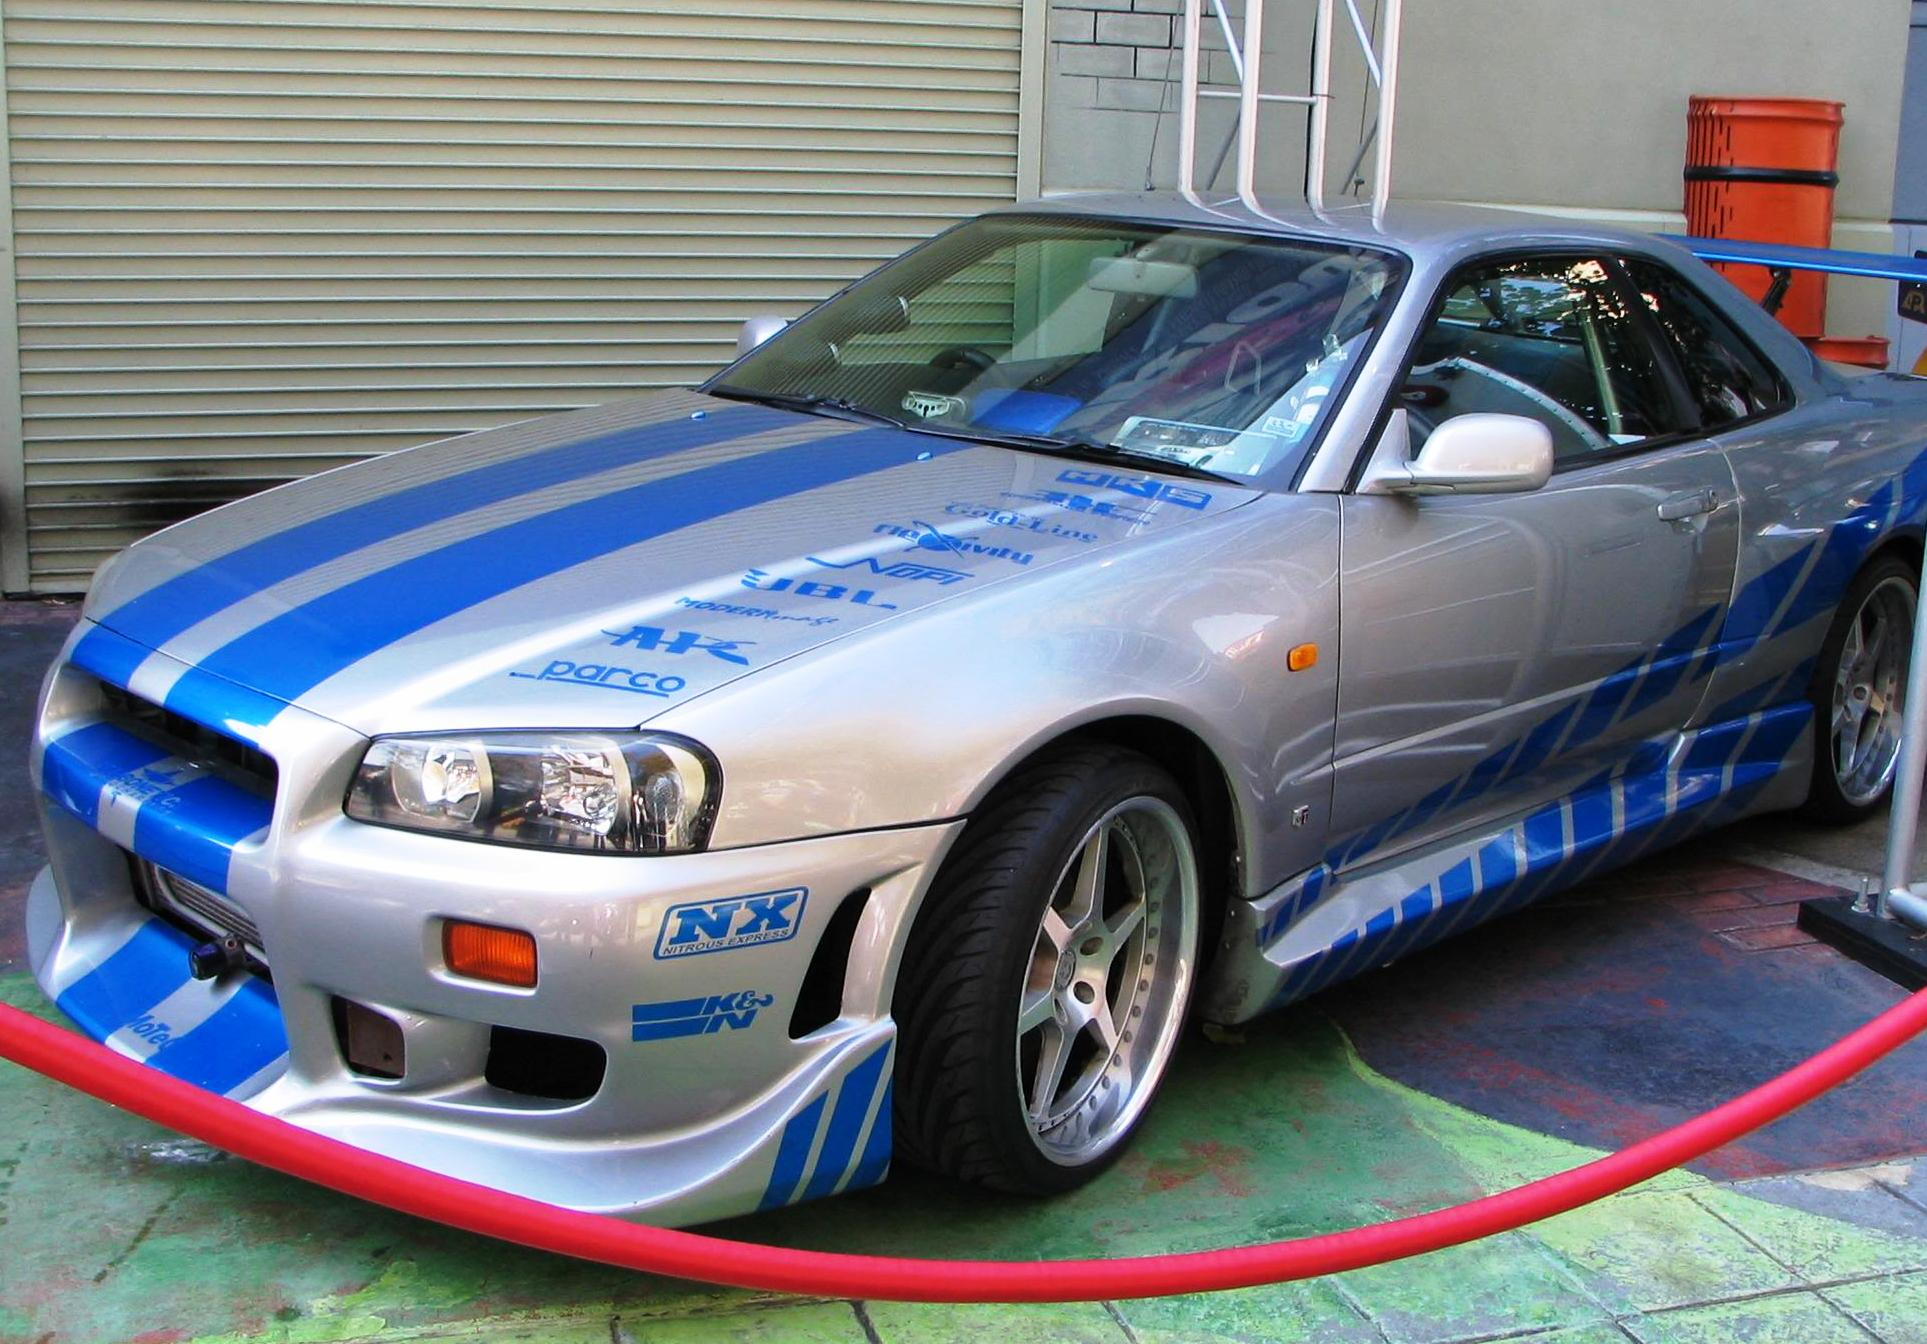 nissan skyline gt r fast and furious 2